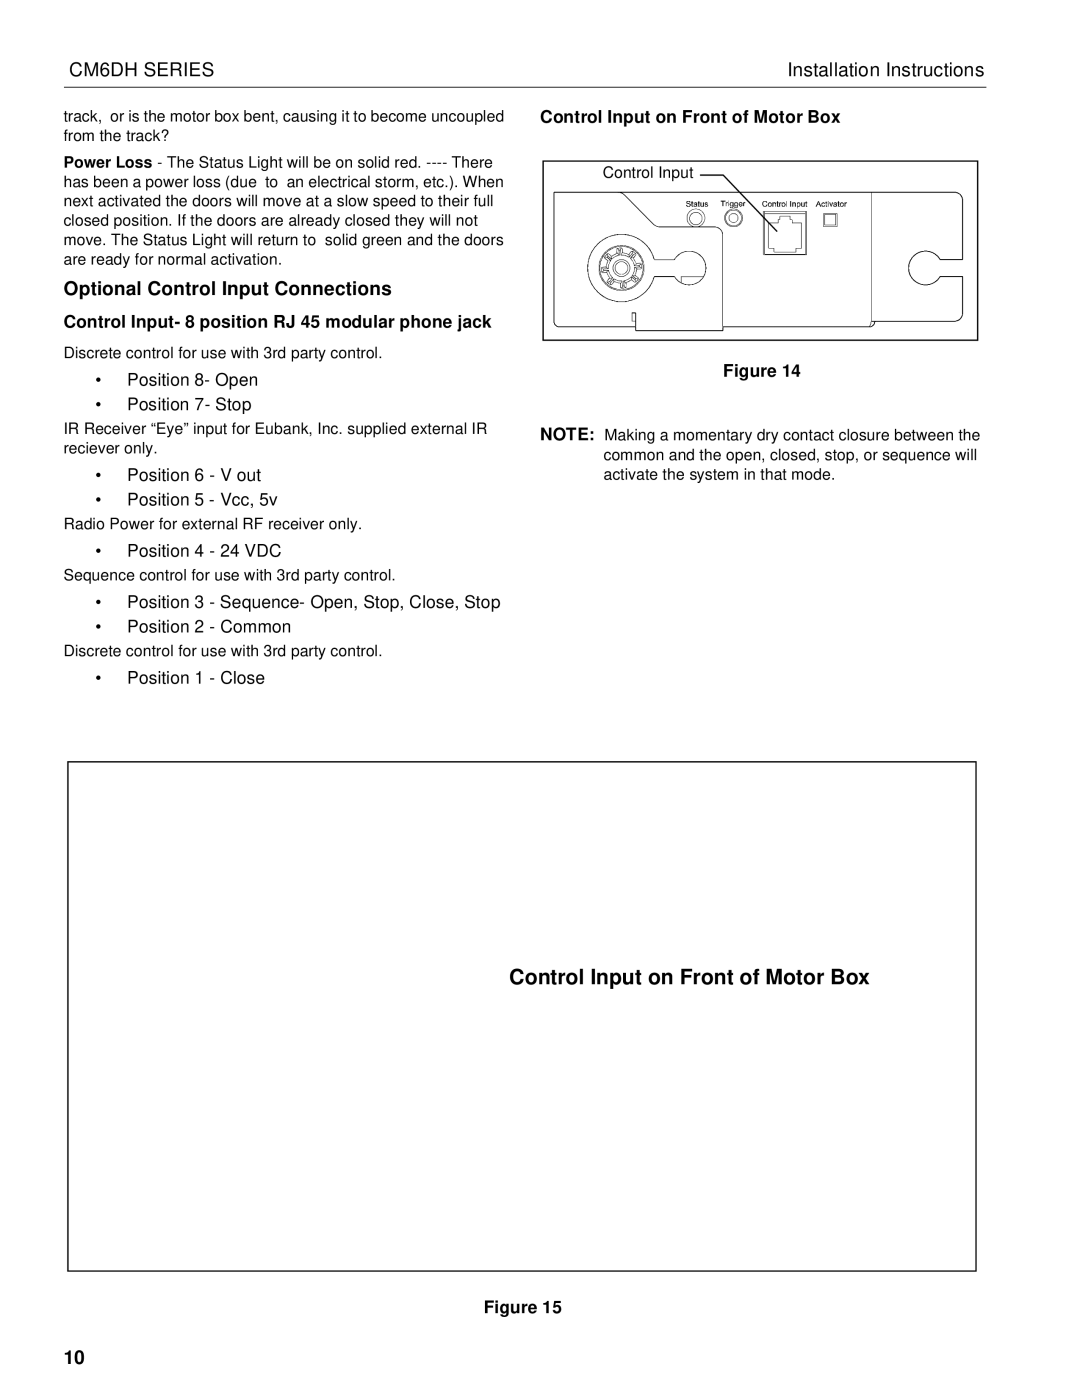 Chief Manufacturing CM6DH installation instructions Control Input on Front of Motor Box, Optional Control Input Connections 